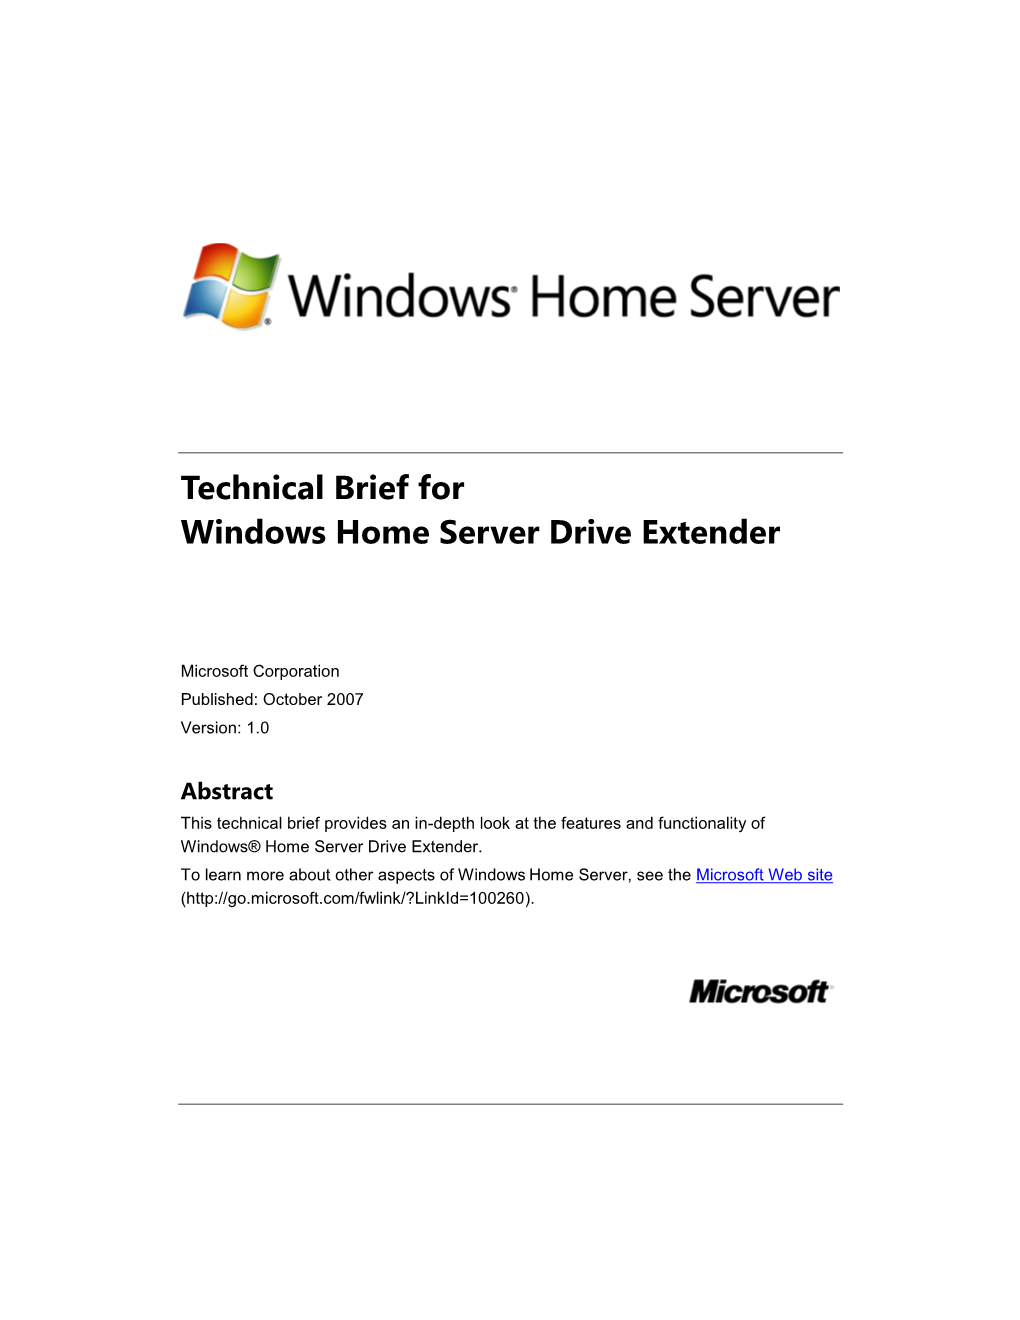 Technical Brief for Windows Home Server Drive Extender